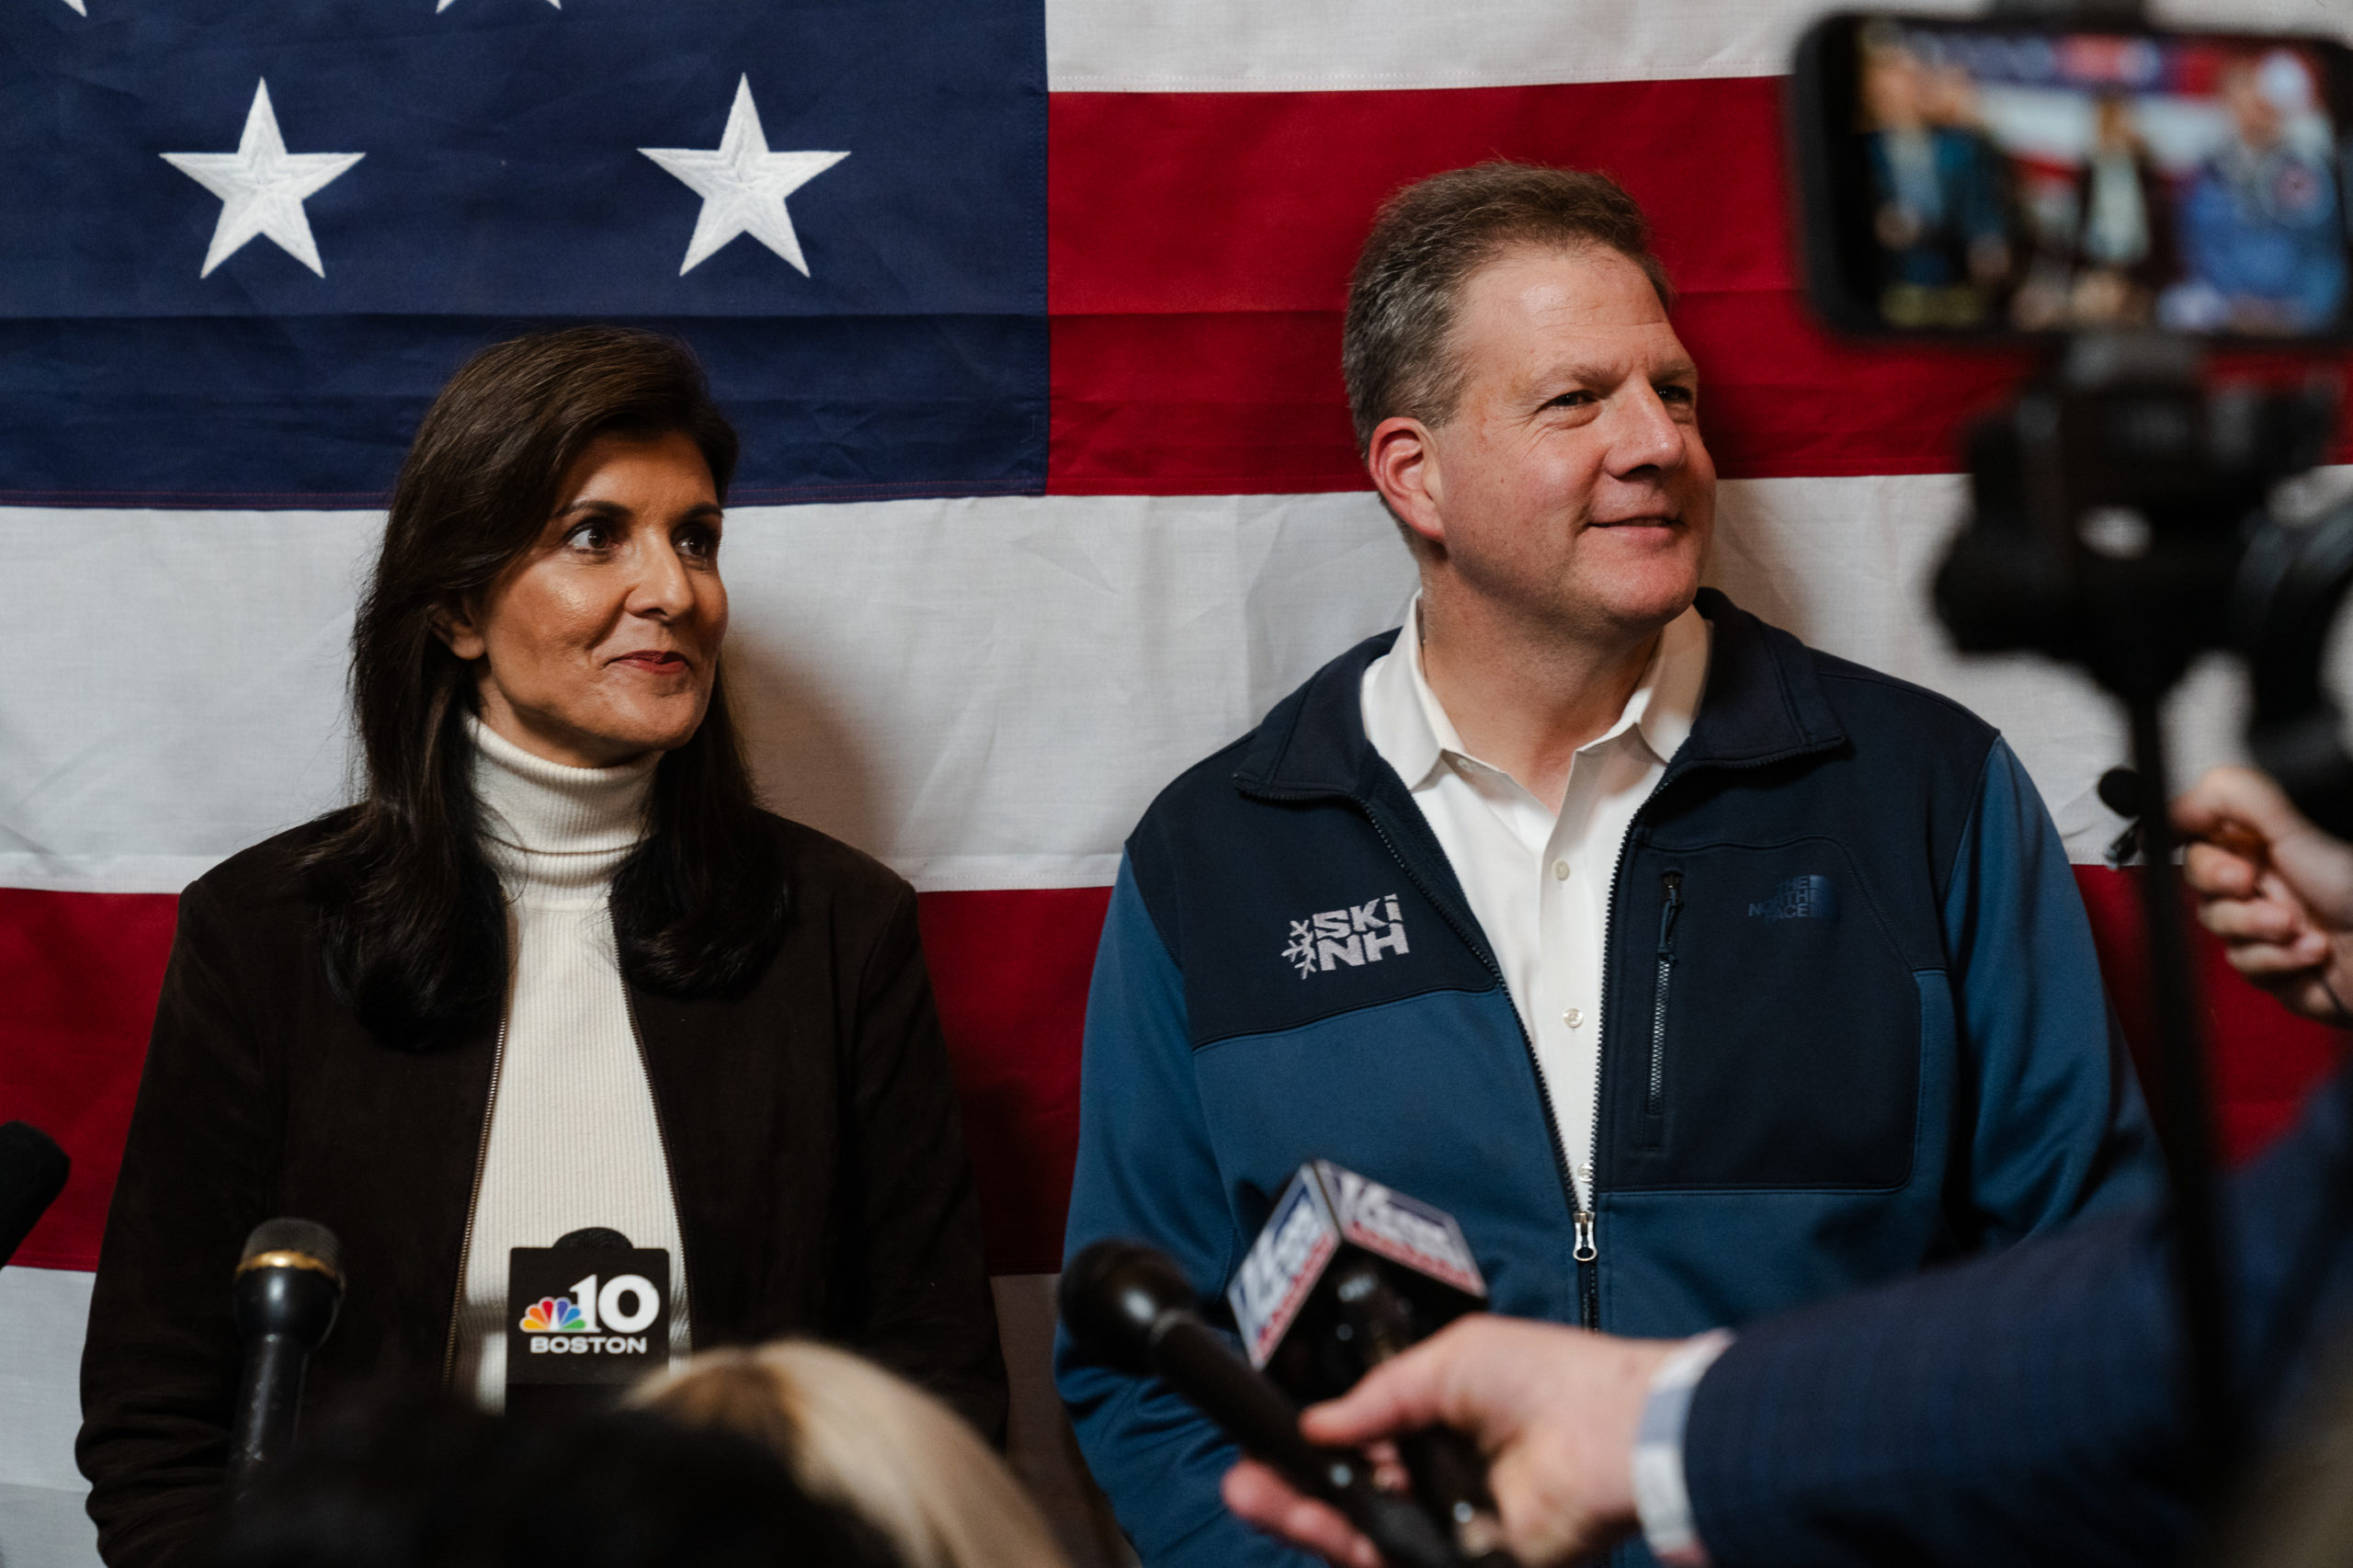 MANCHESTER, NEW HAMPSHIRE - DECEMBER 12: Republican Presidential Candidate Nikki Haley and New Hampshire Gov. Chris Sununu speak to members of the press after Sununu's endorsement of Haley during a Town hall event at McIntyre Ski Area on December 12, 2023 in Manchester, New Hampshire. (Photo by Sophie Park/Getty Images)